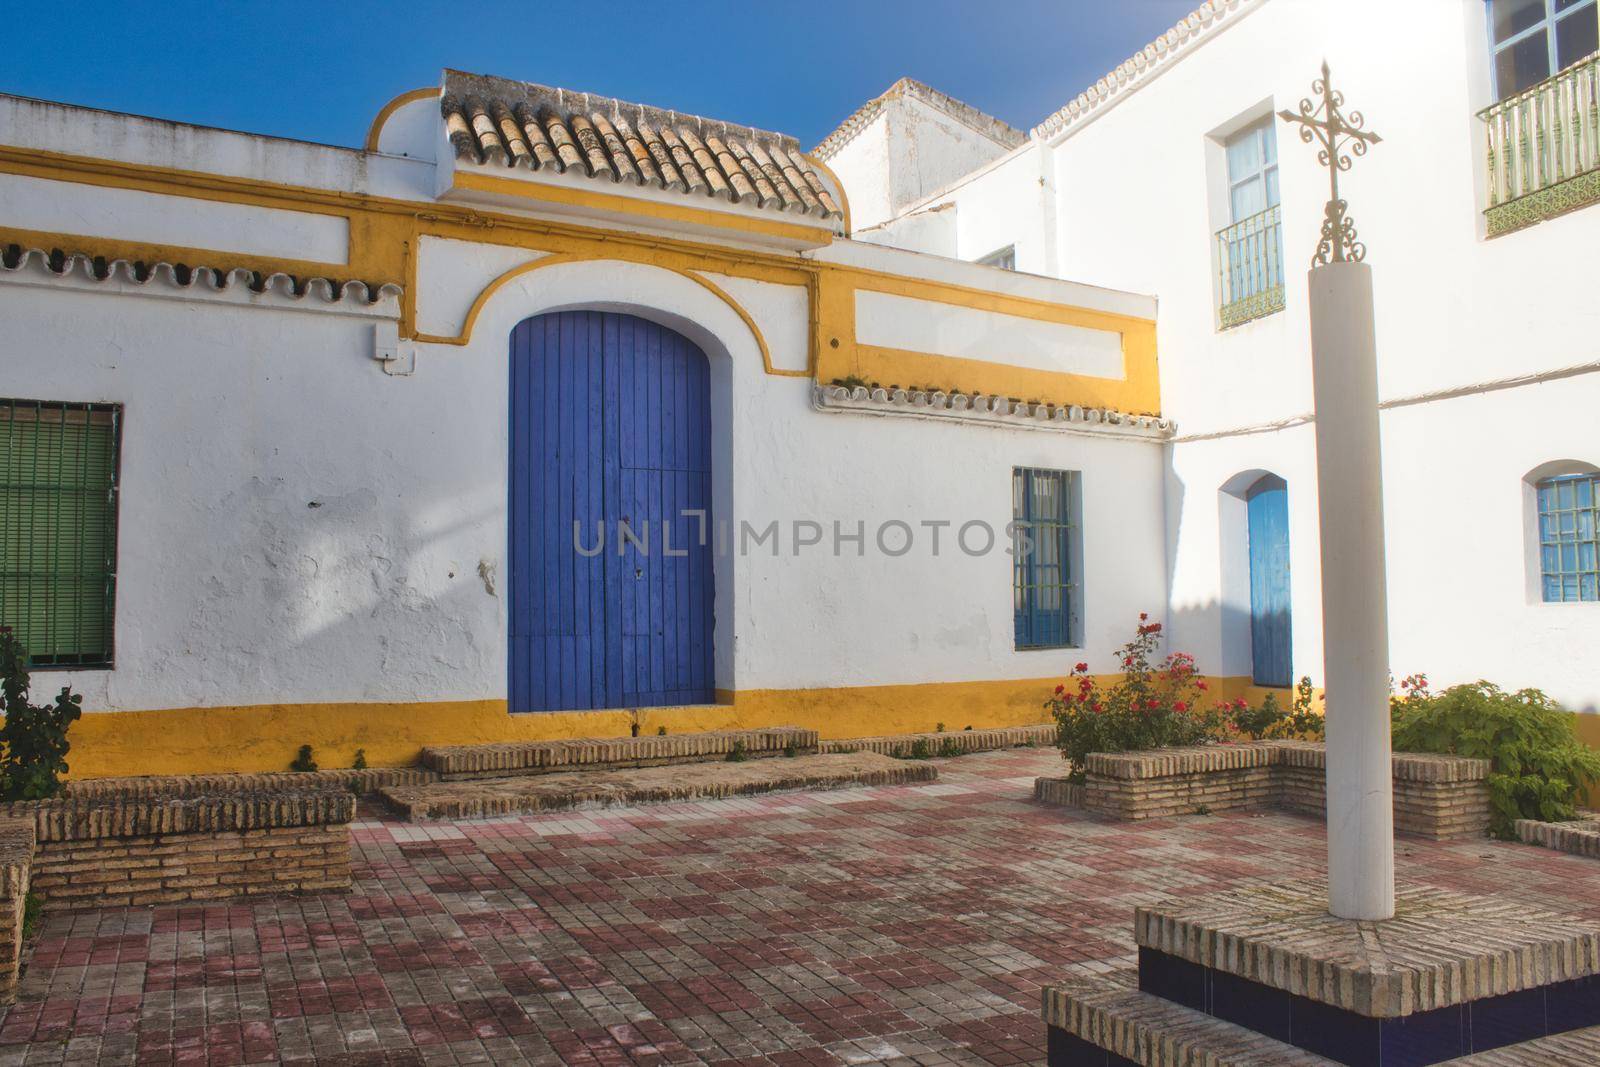 Spanish brightly colored courtyard or patio in the sun with an ornate cross on a column by tennesseewitney